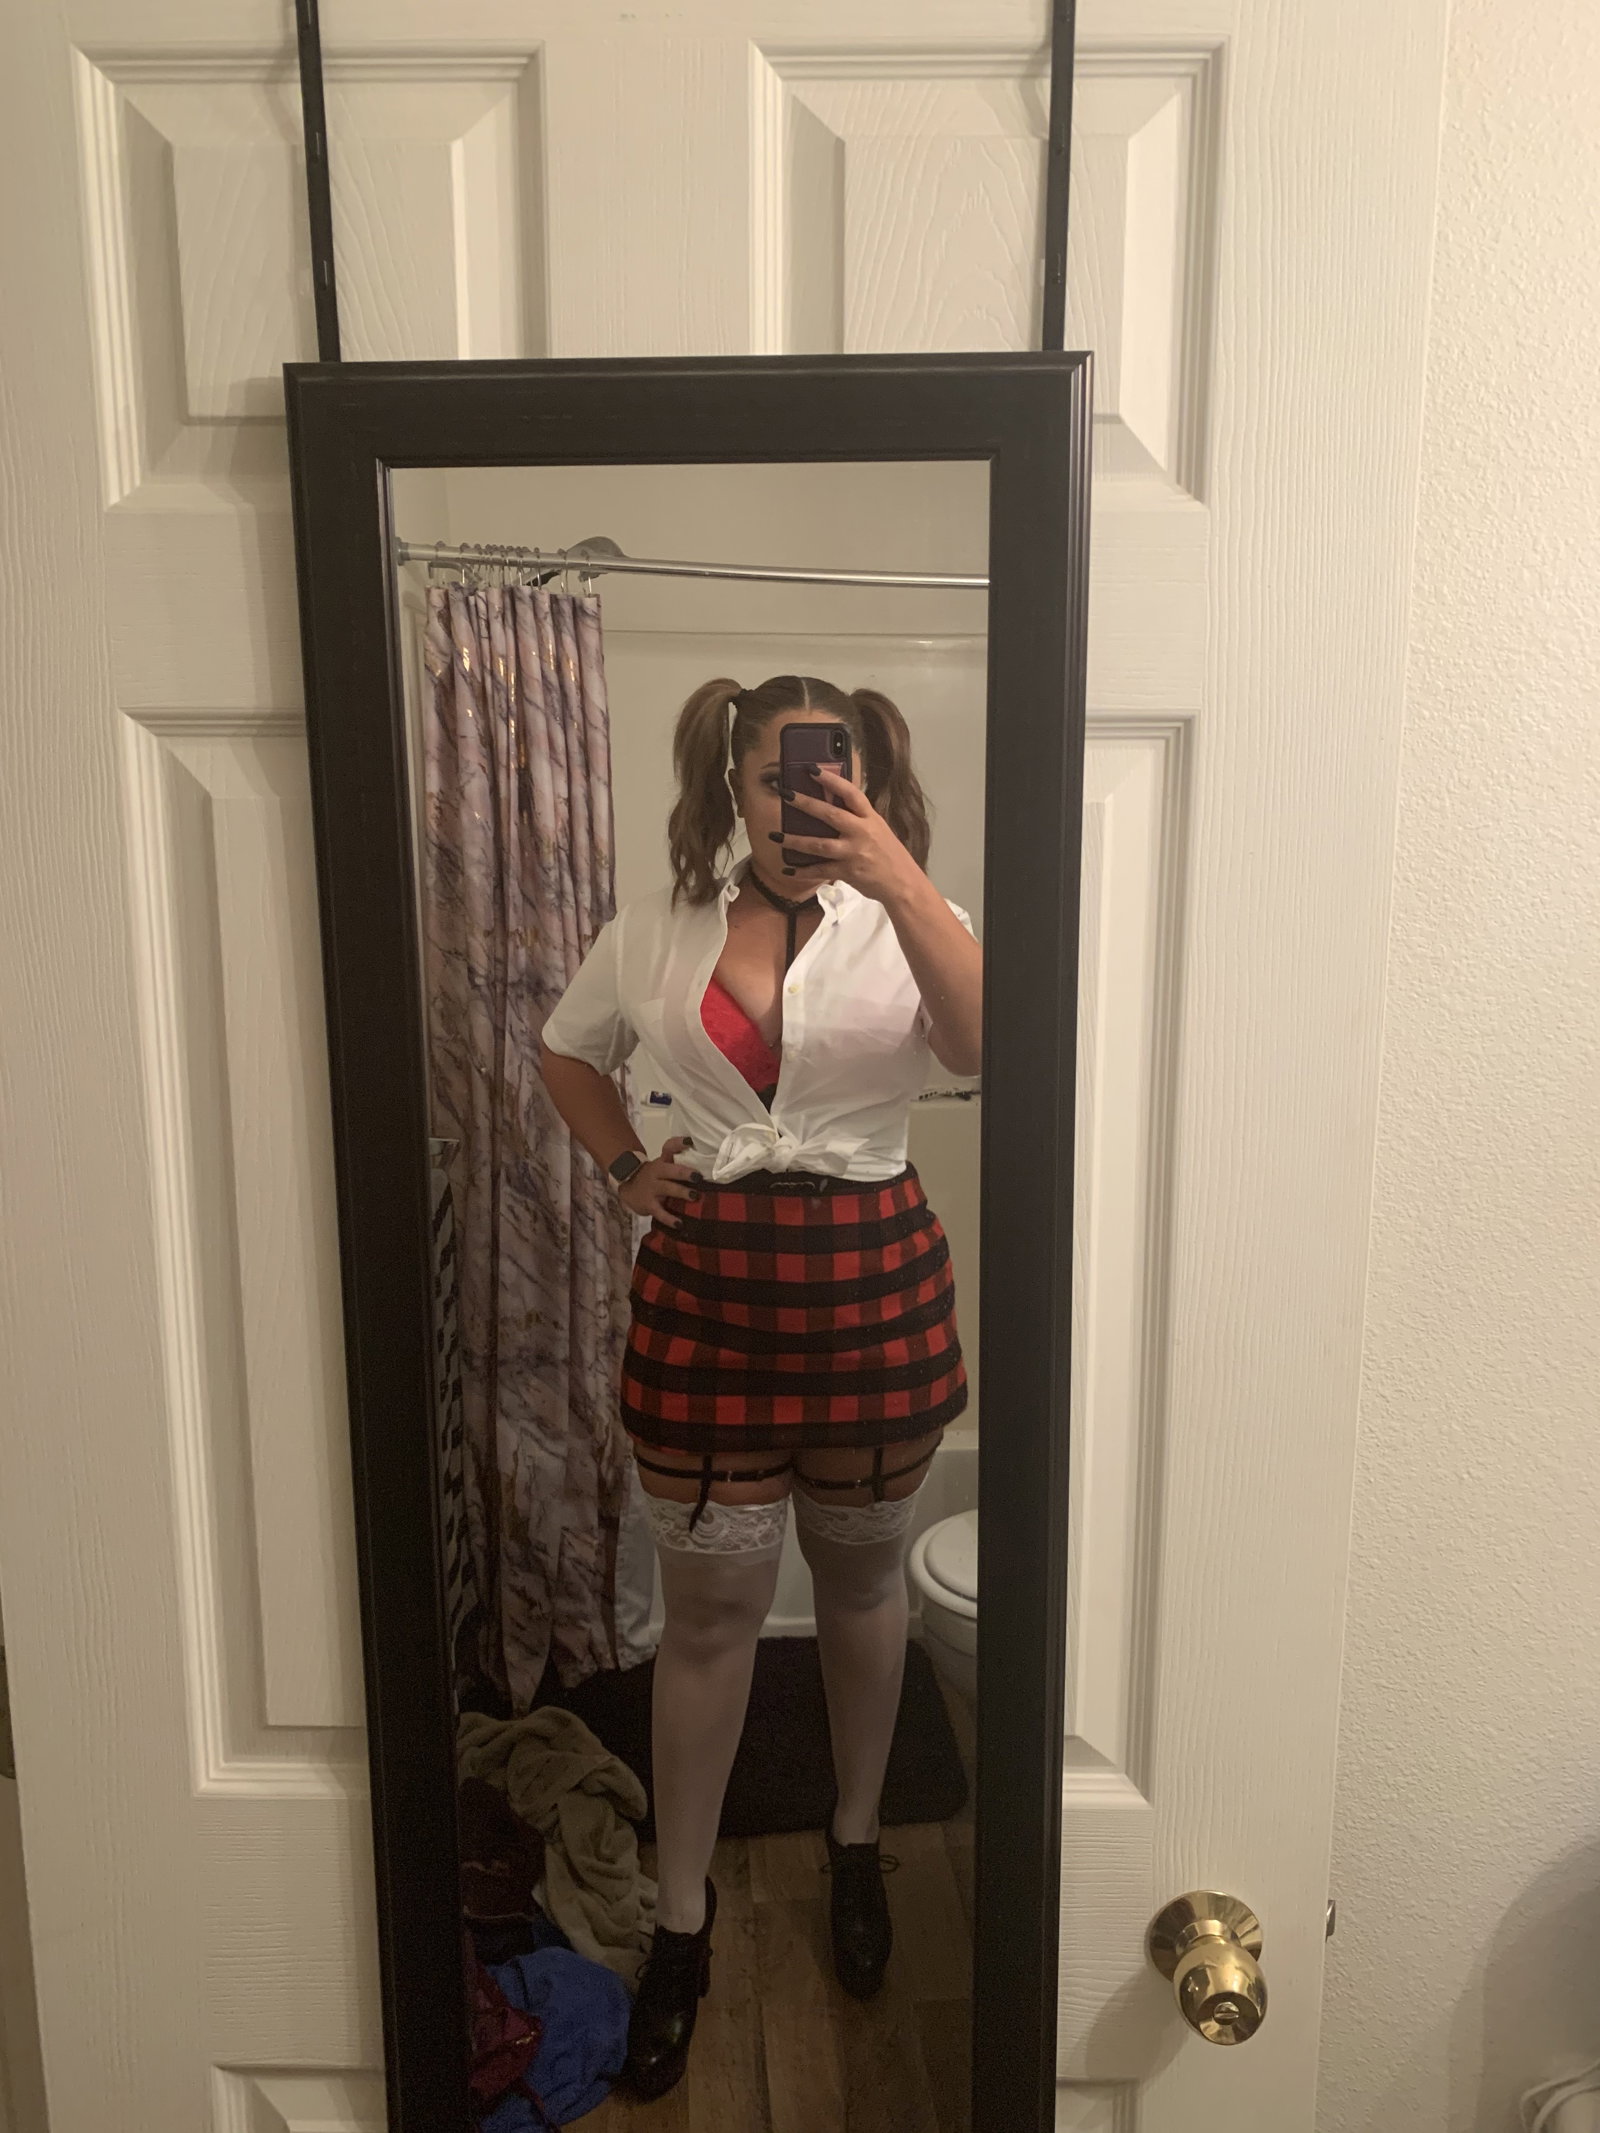 Watch the Photo by Imhisvixen with the username @ImHisVixen, who is a star user, posted on October 29, 2019. The post is about the topic Hotwife. and the text says 'Layer 0-3 of my schoolgirl Halloween outfit.
I went out with @shesmyvixen and he got to watch as I grinded on another man and he grabbed my ass. He also got my number and begged me to come home.
I also got a woman's number because her ex told her he..'